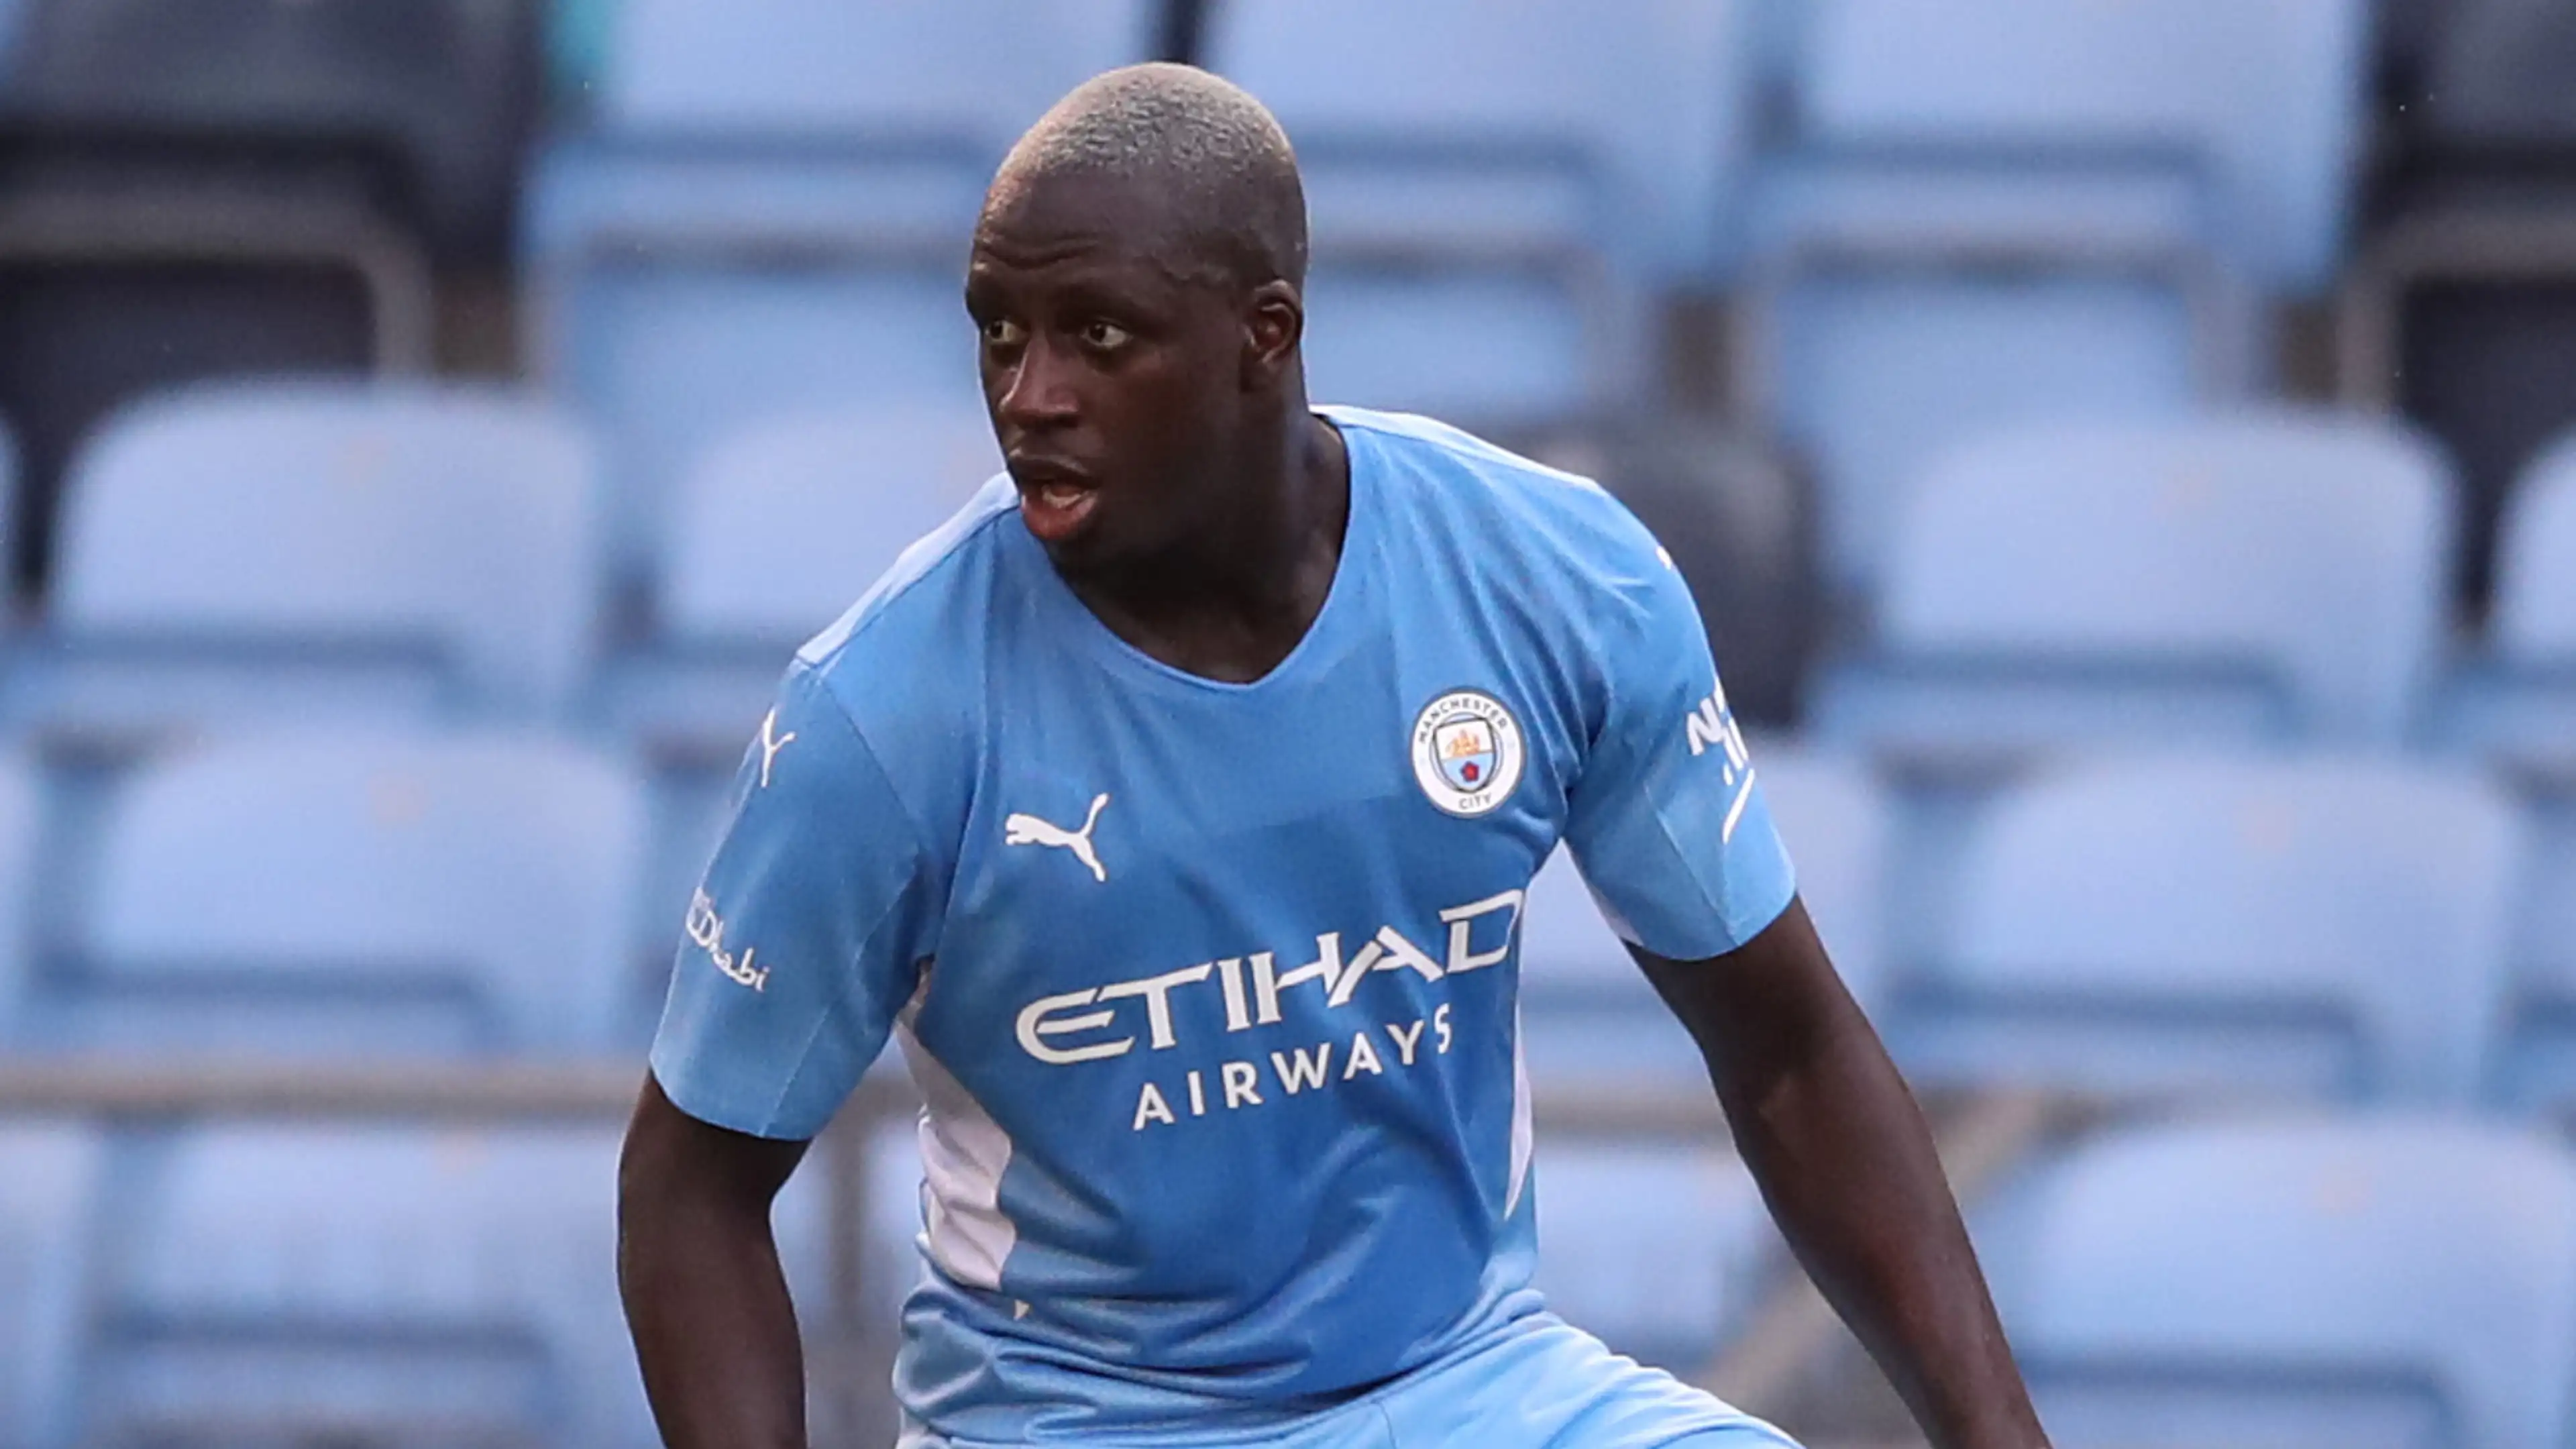 Footballer Benjamin Mendy has taken British giants Manchester City to an employment tribunal in Britain, claiming that his salary was illegally deducted and that the club owes him millions of pounds. 